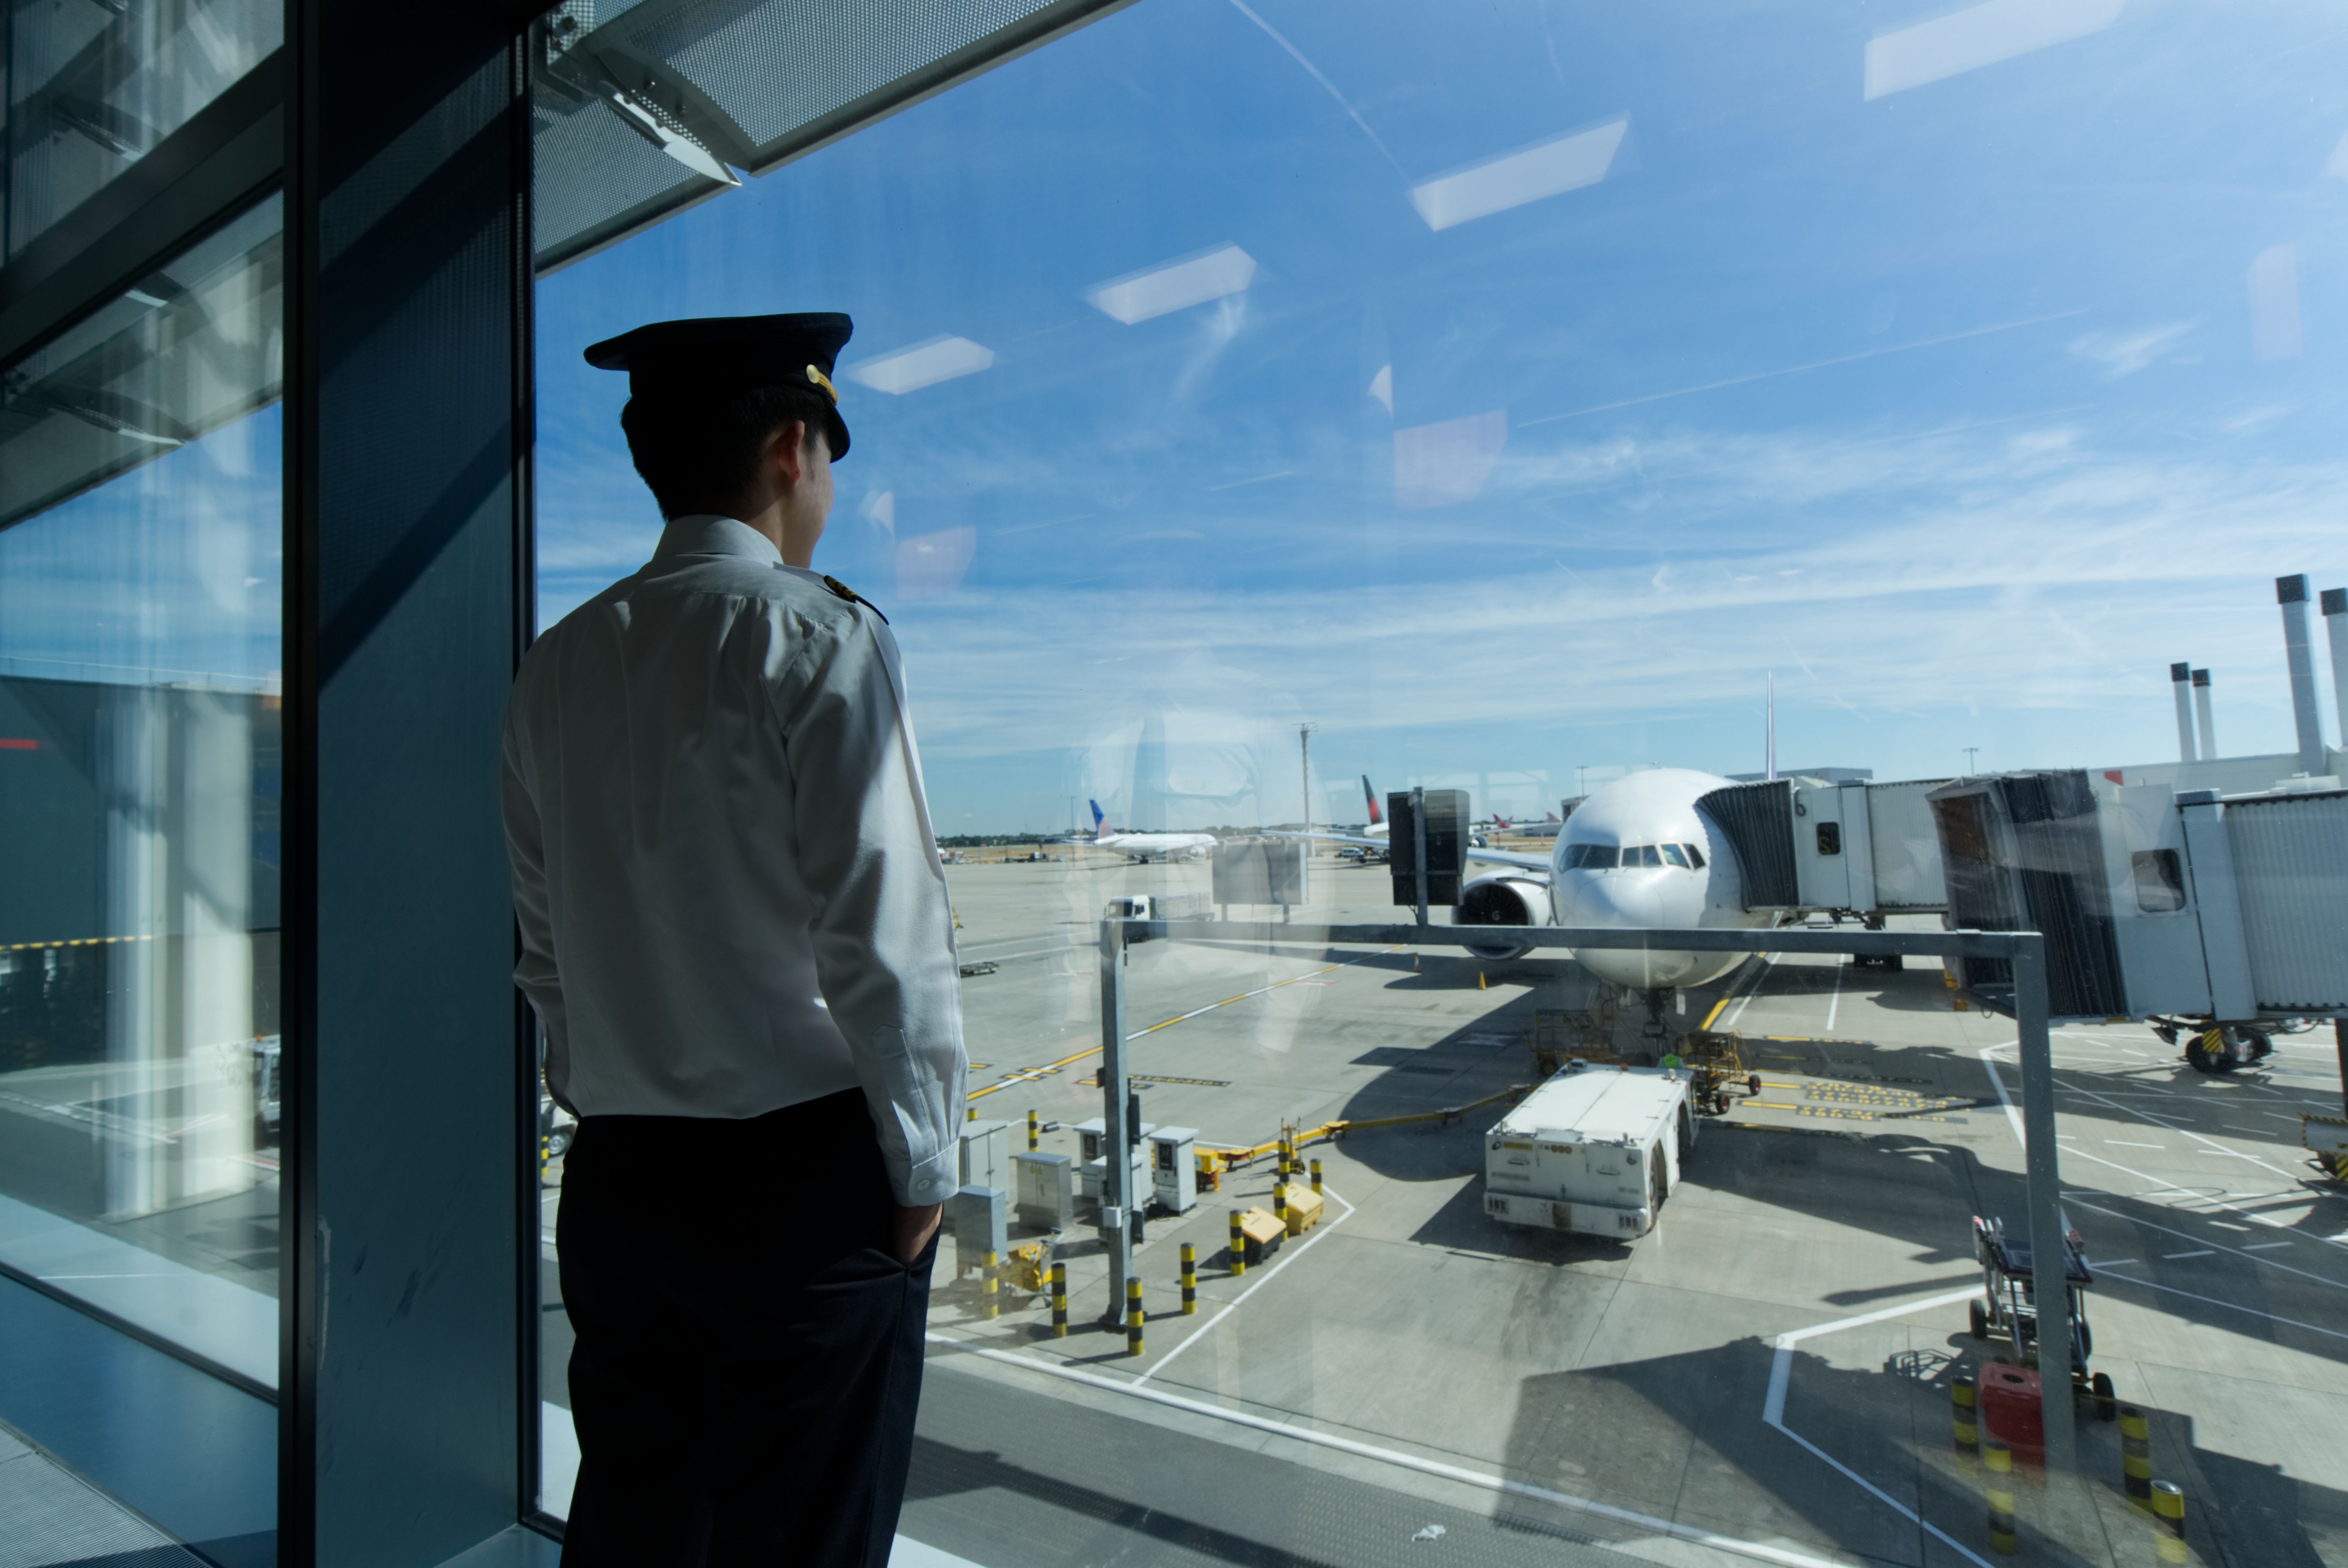 A pilot stands at the boarding gate area in an airport terminal.